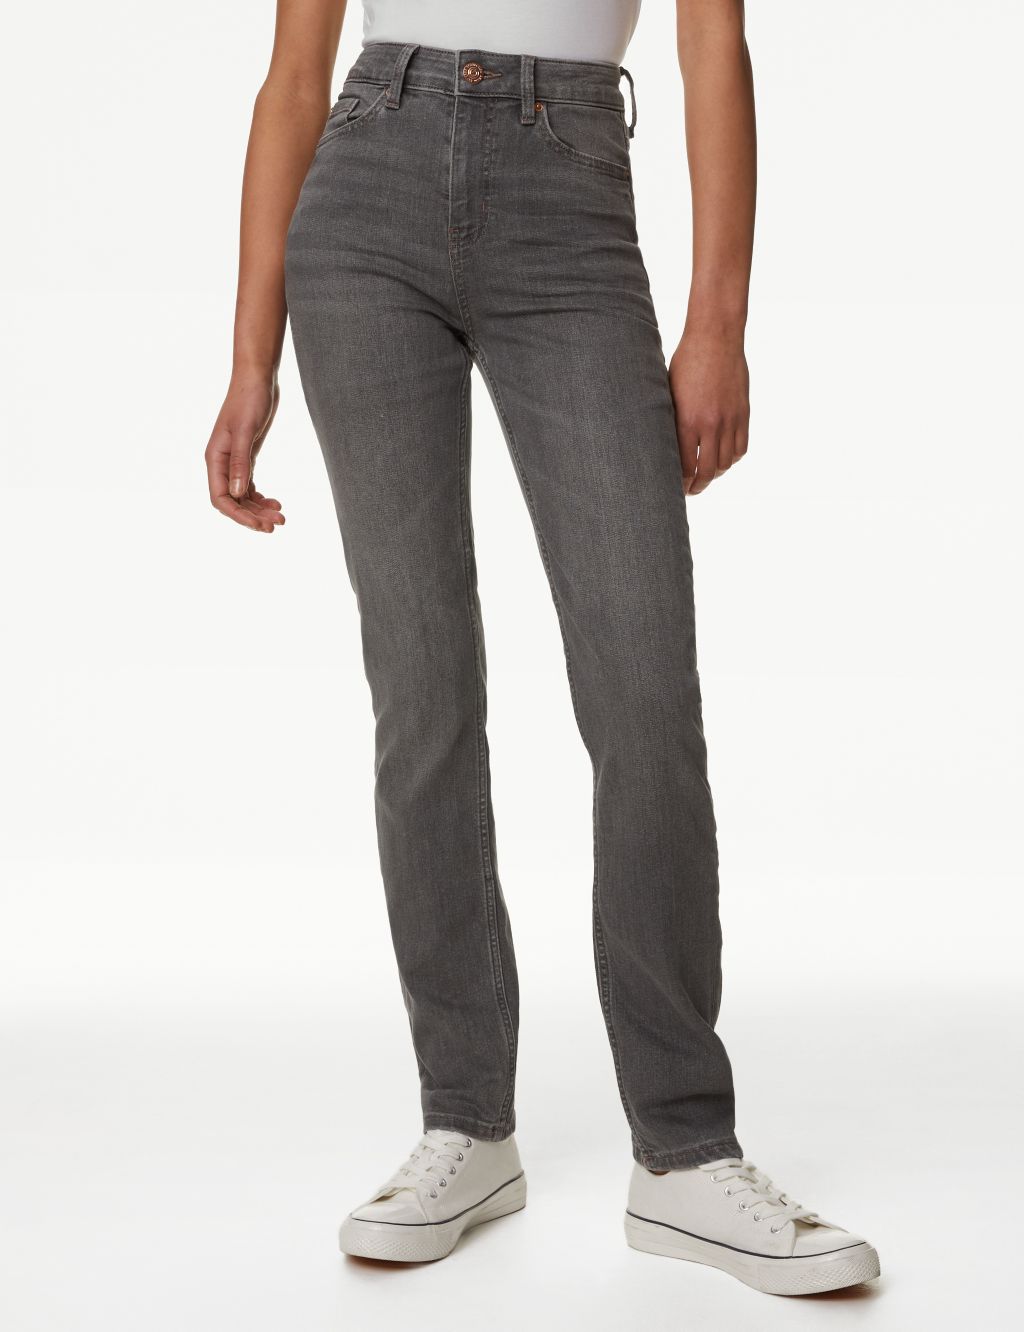 Lily Slim Fit Jeans with Stretch image 3